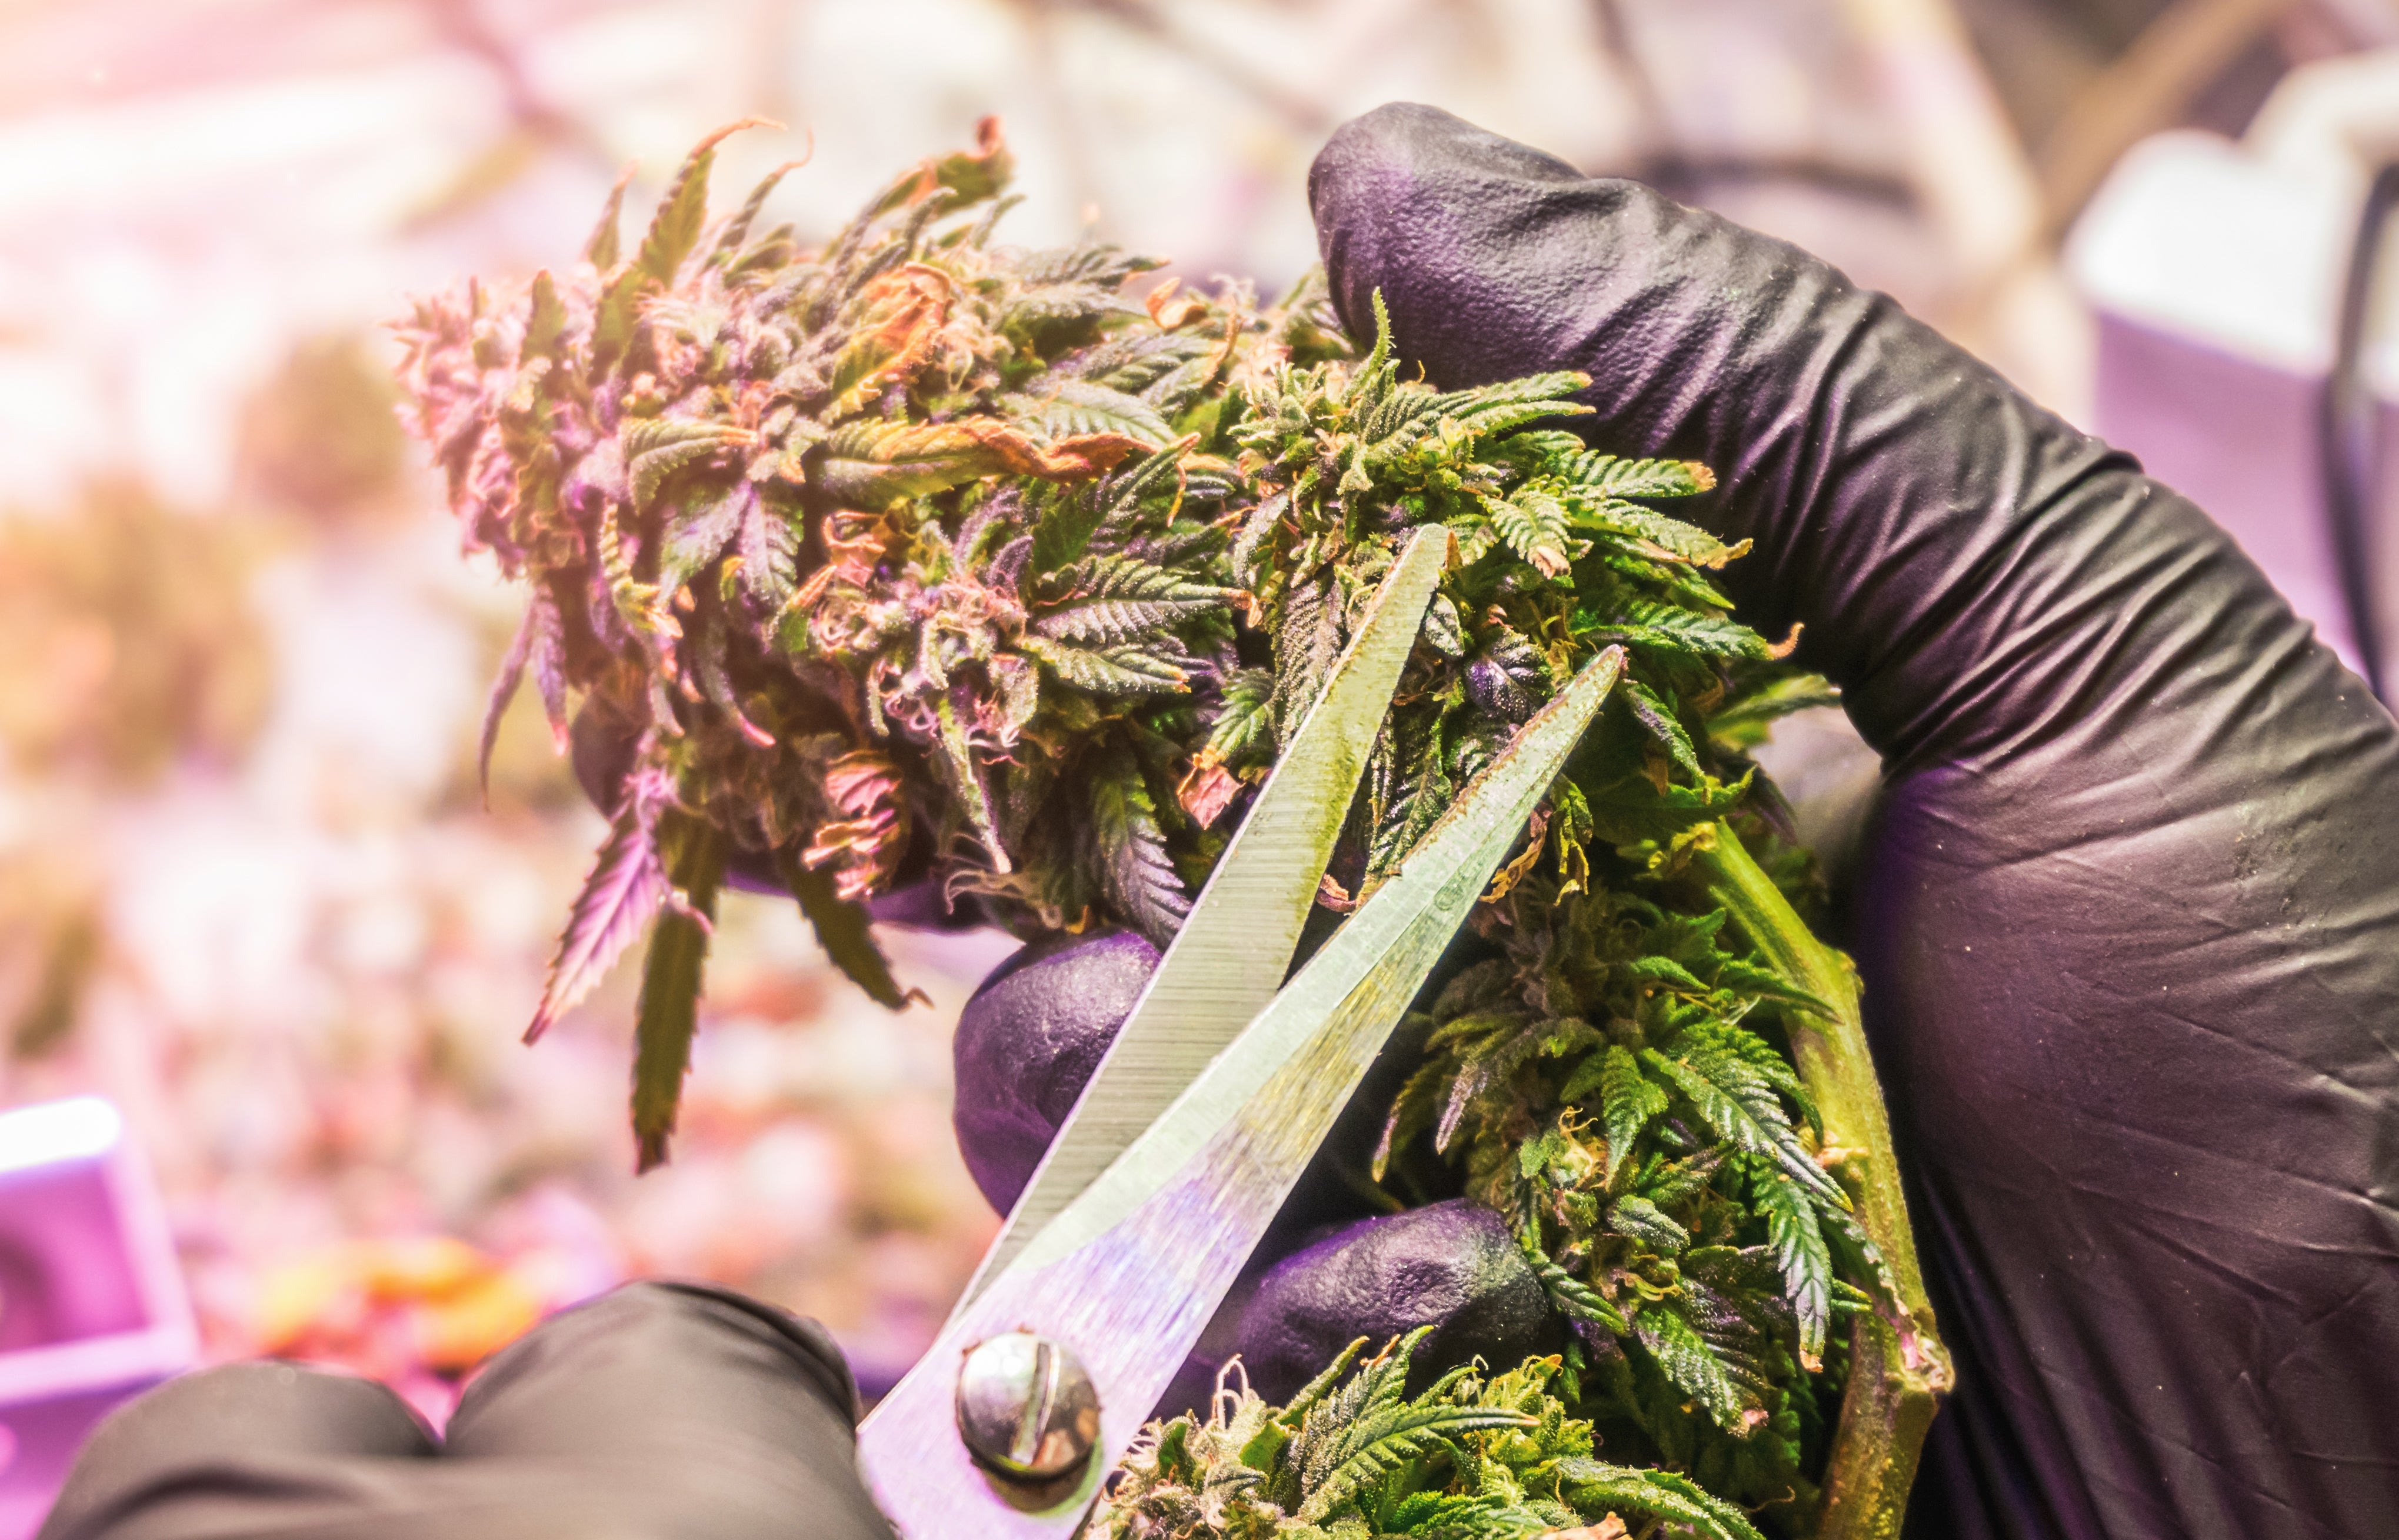 A person is using scissors to trim a large cannabis flower bud.